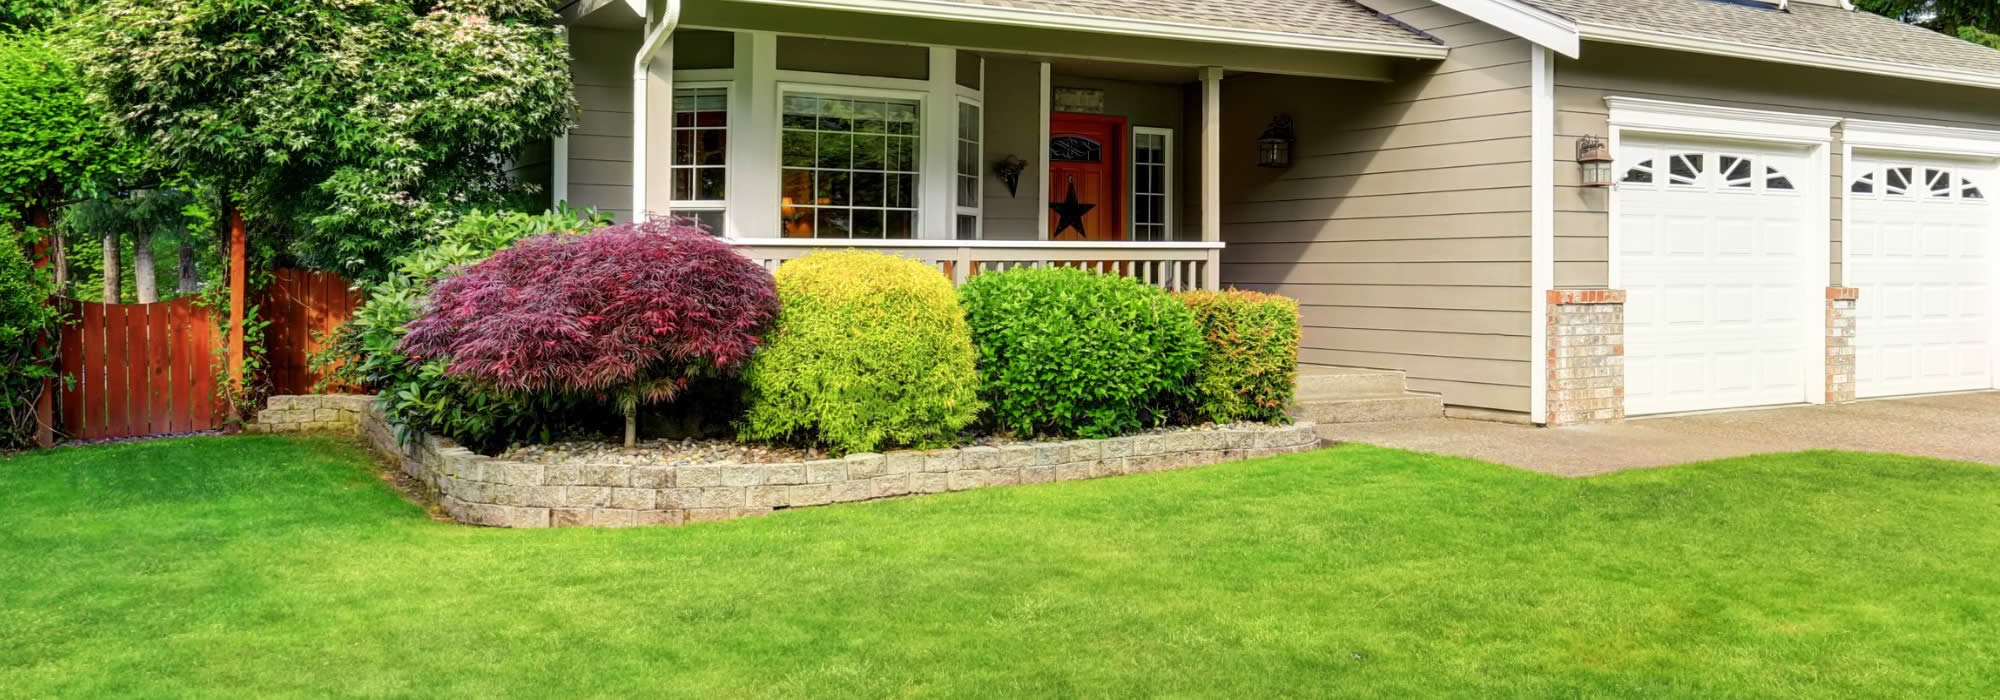 Landscaping Services in Waunakee